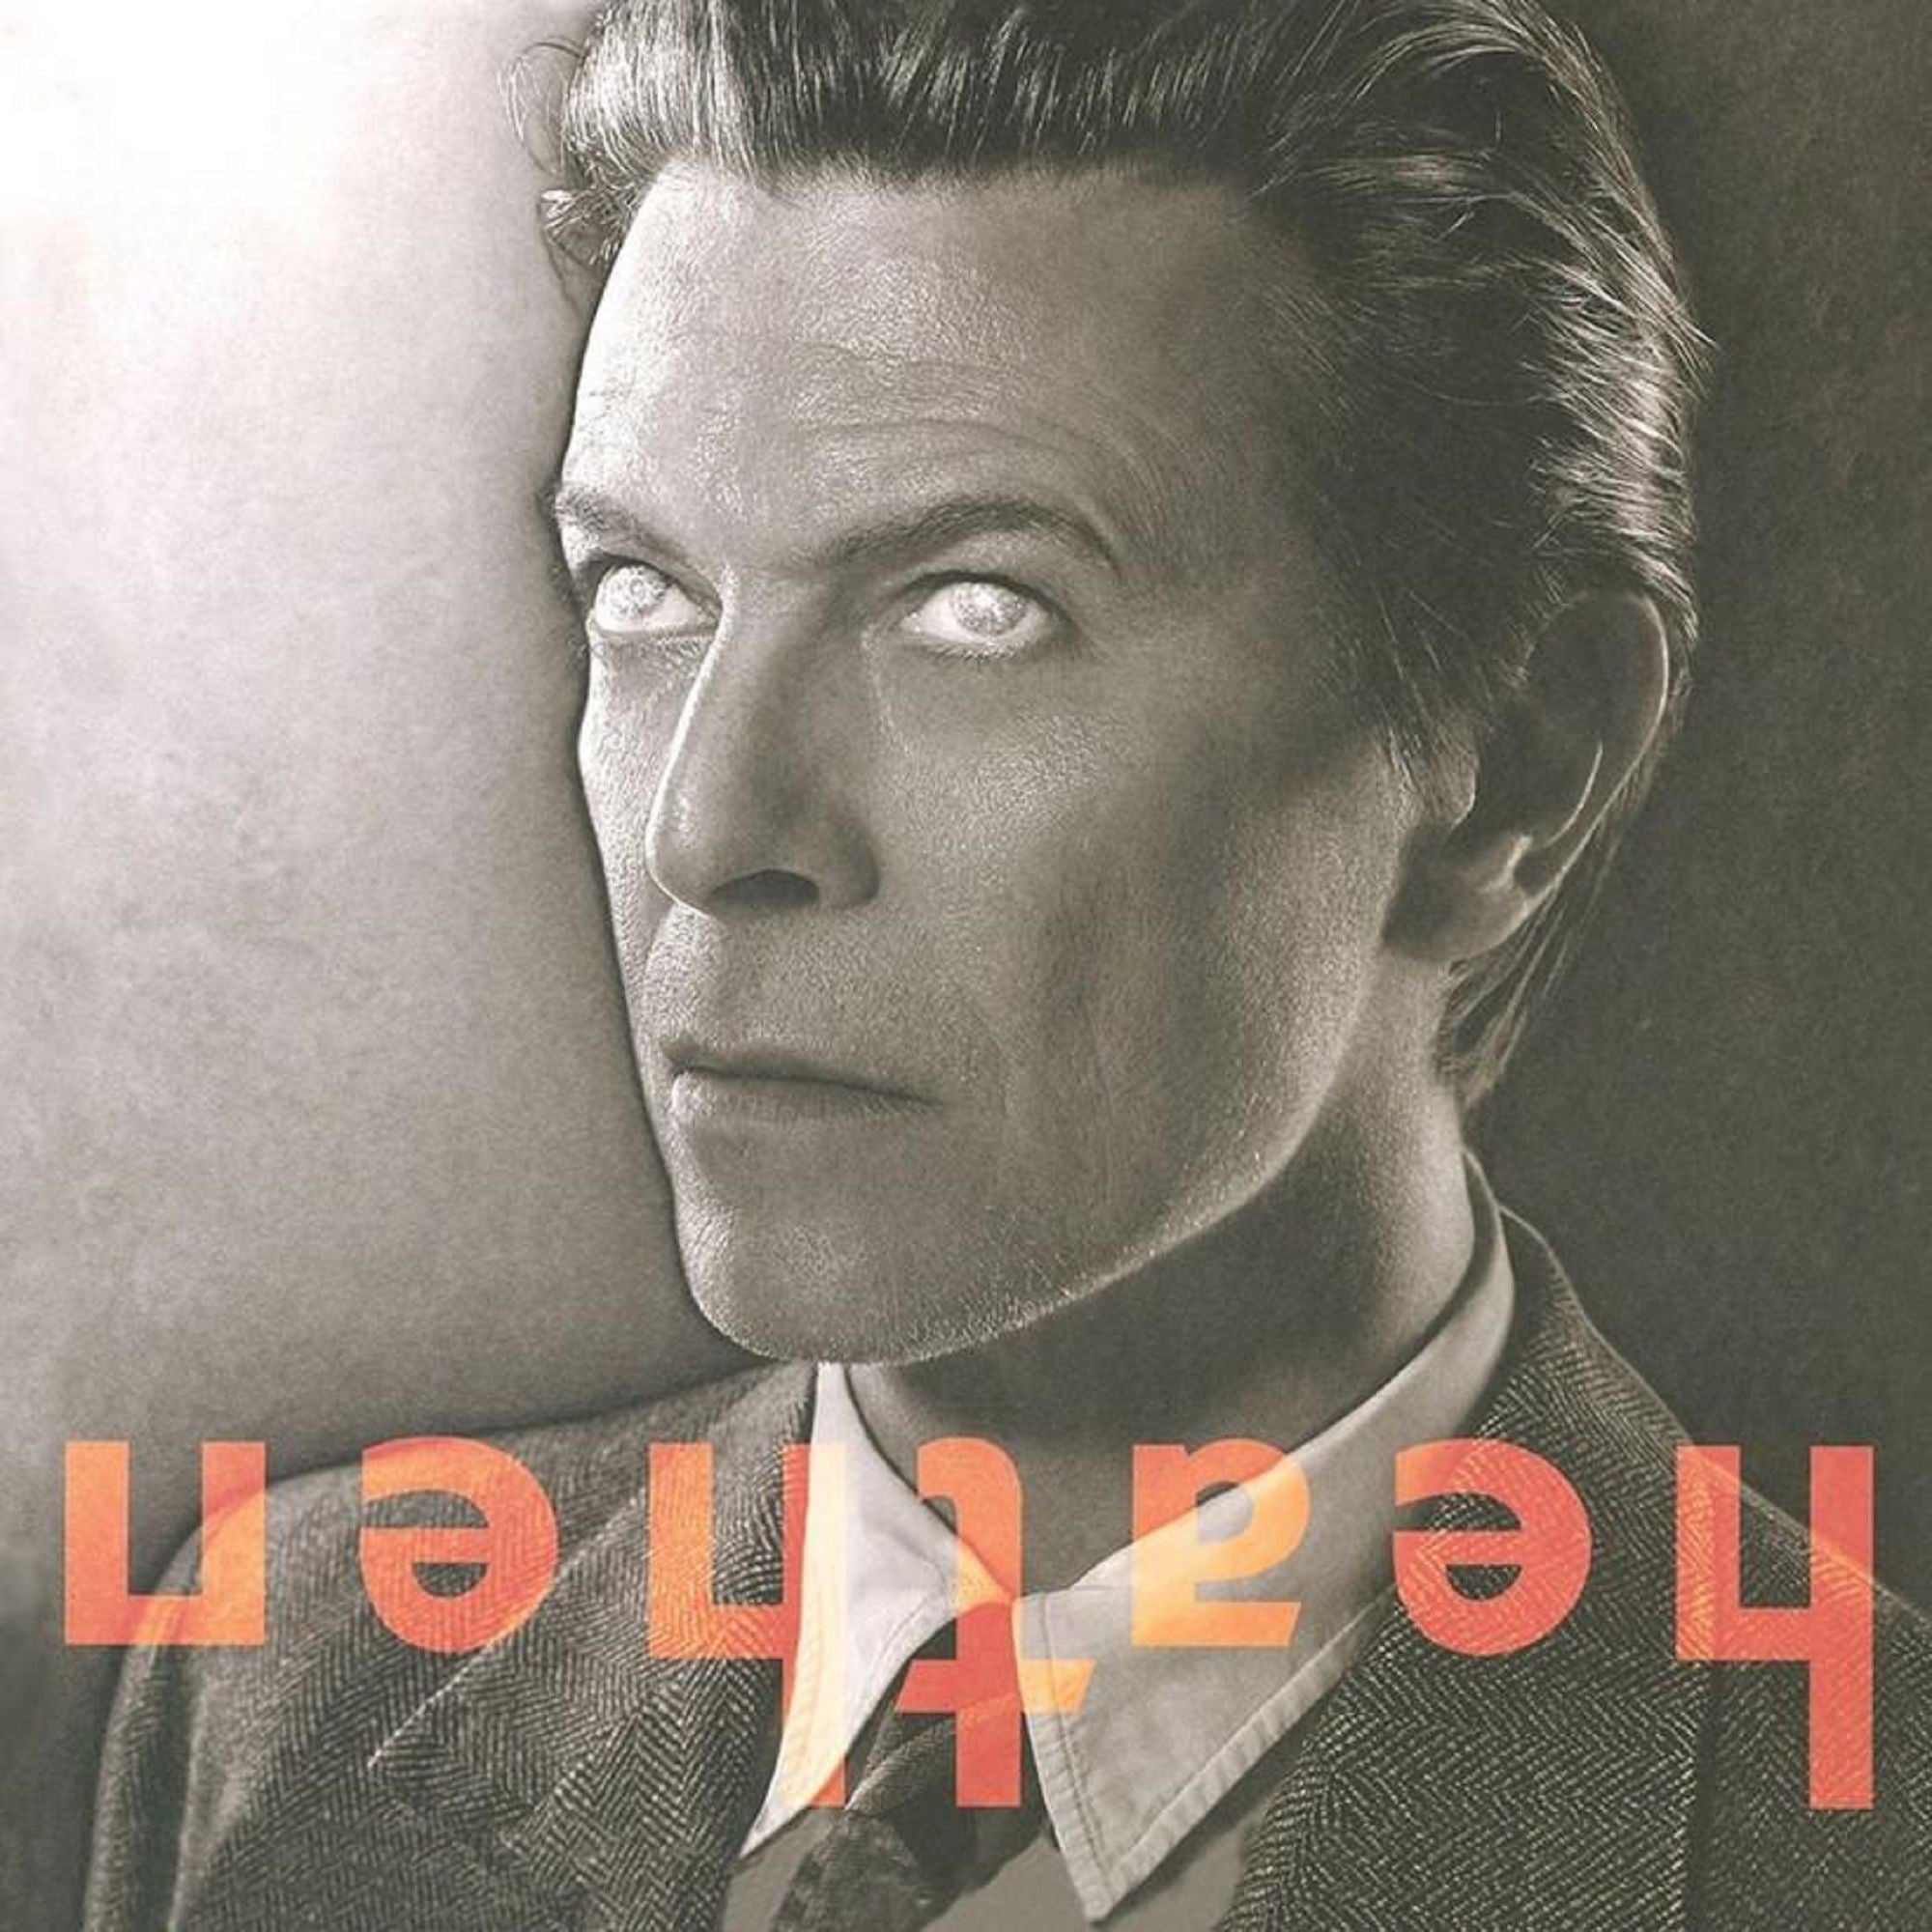 David Bowie - Heathen - New Vinyl Lp 2018 Friday Music Limited Edition 180gram Audiophile Reissue on Translucent Gold Vinyl with Tri-Fold Cover - Art Rock